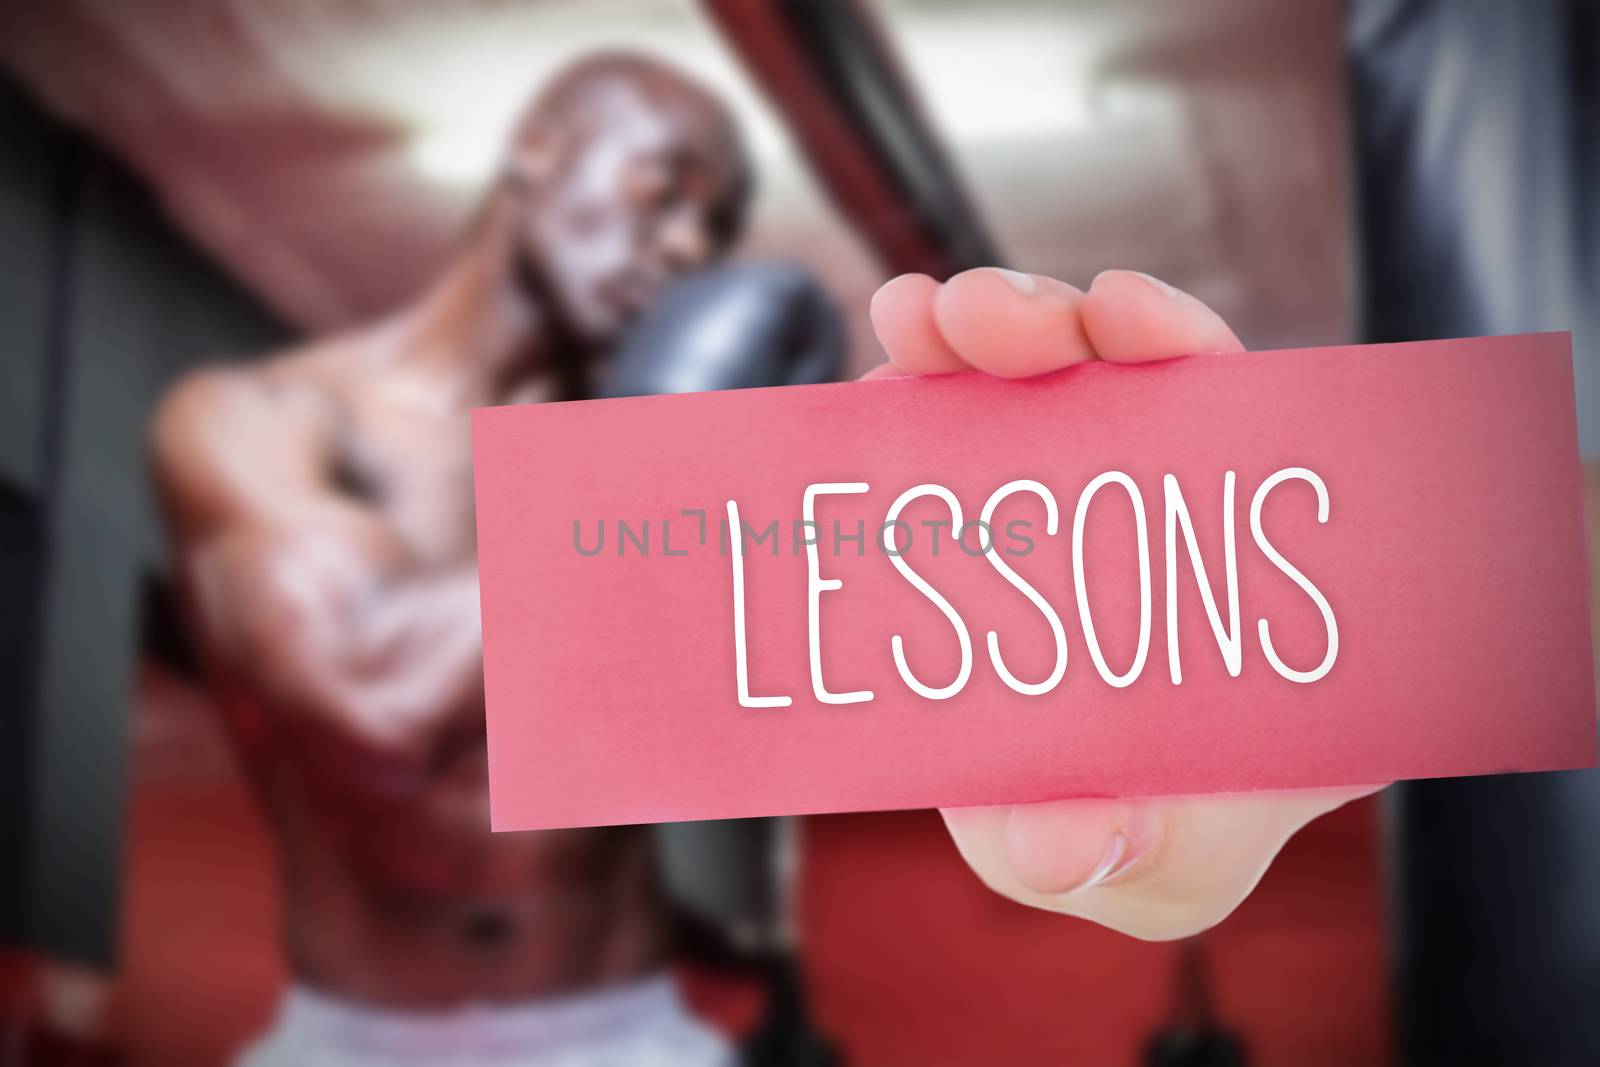 Lessons against people background by Wavebreakmedia